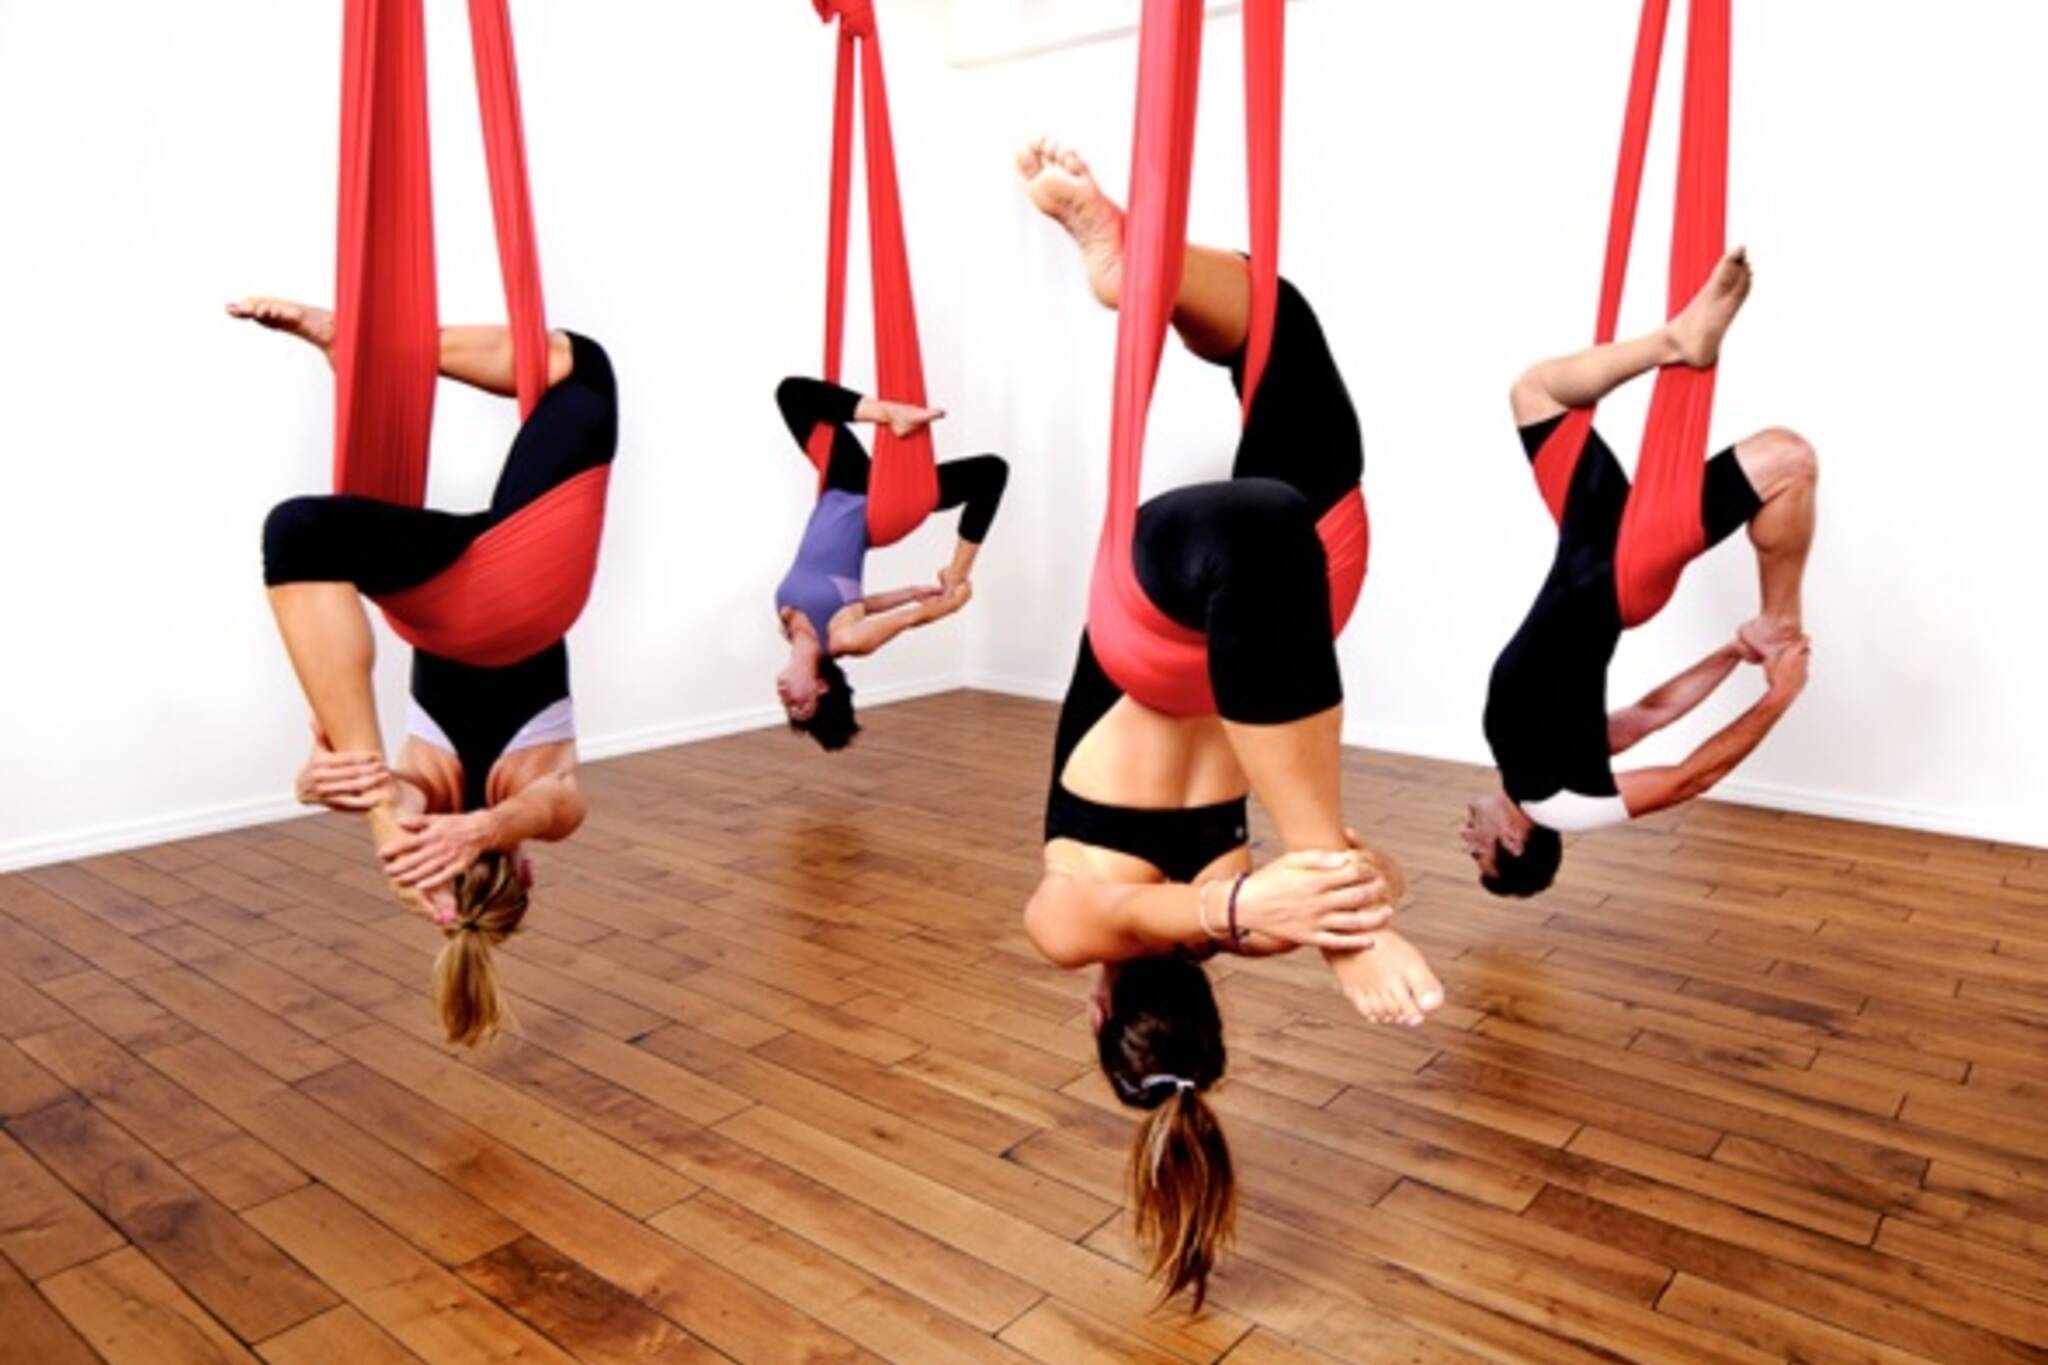 https://media.blogto.com/articles/4301-20110117-aerialyoga.jpg?w=2048&cmd=resize_then_crop&height=1365&quality=70